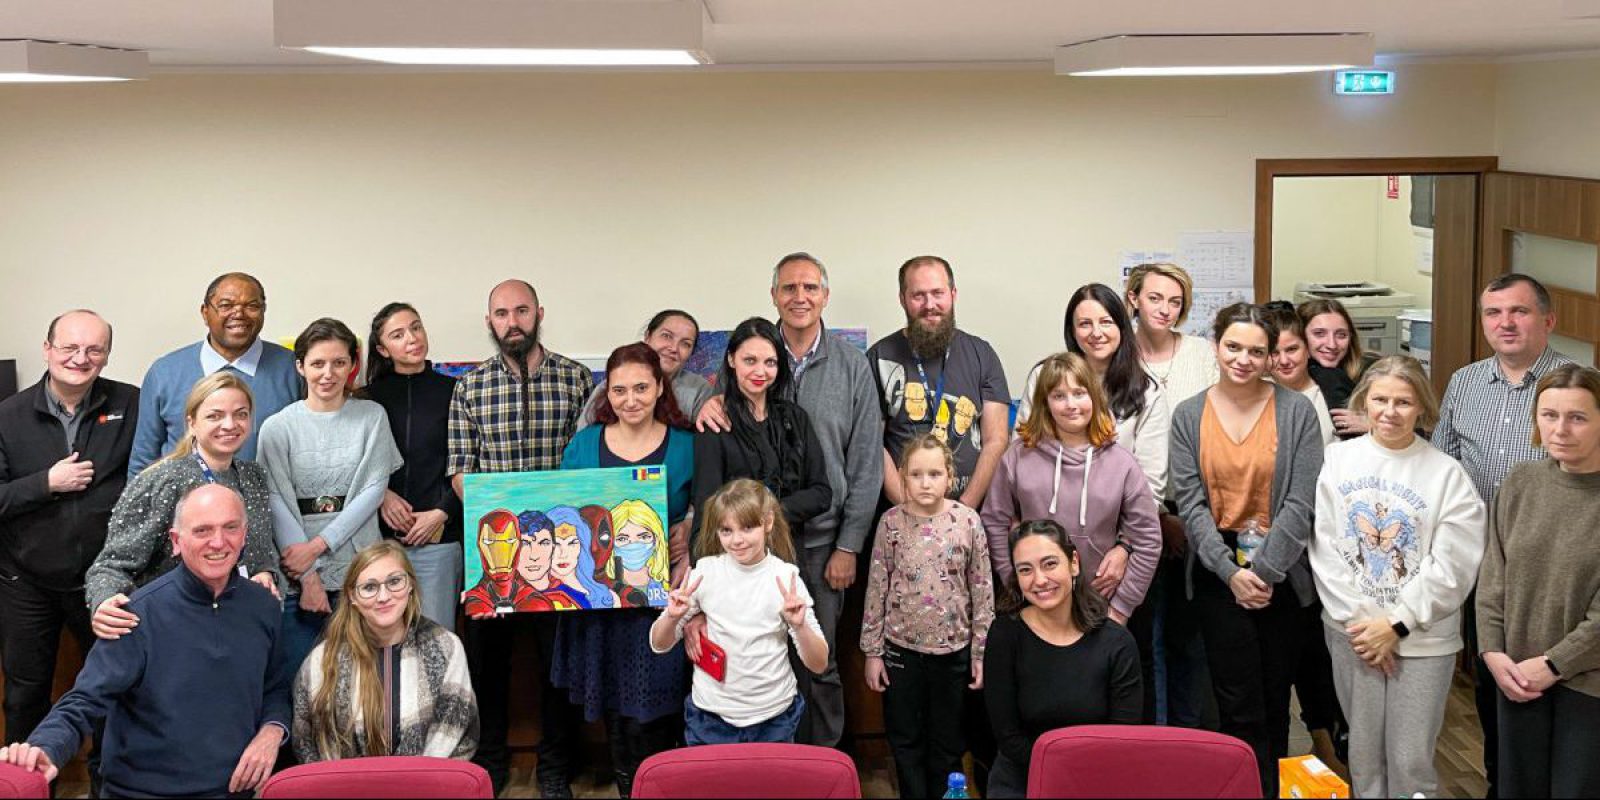 Year-end reflection JRS: Ukrainian and Romanian staff, together with JRS International Office and JRS Europe visiting staff share a moment together with refugees in Bucharest